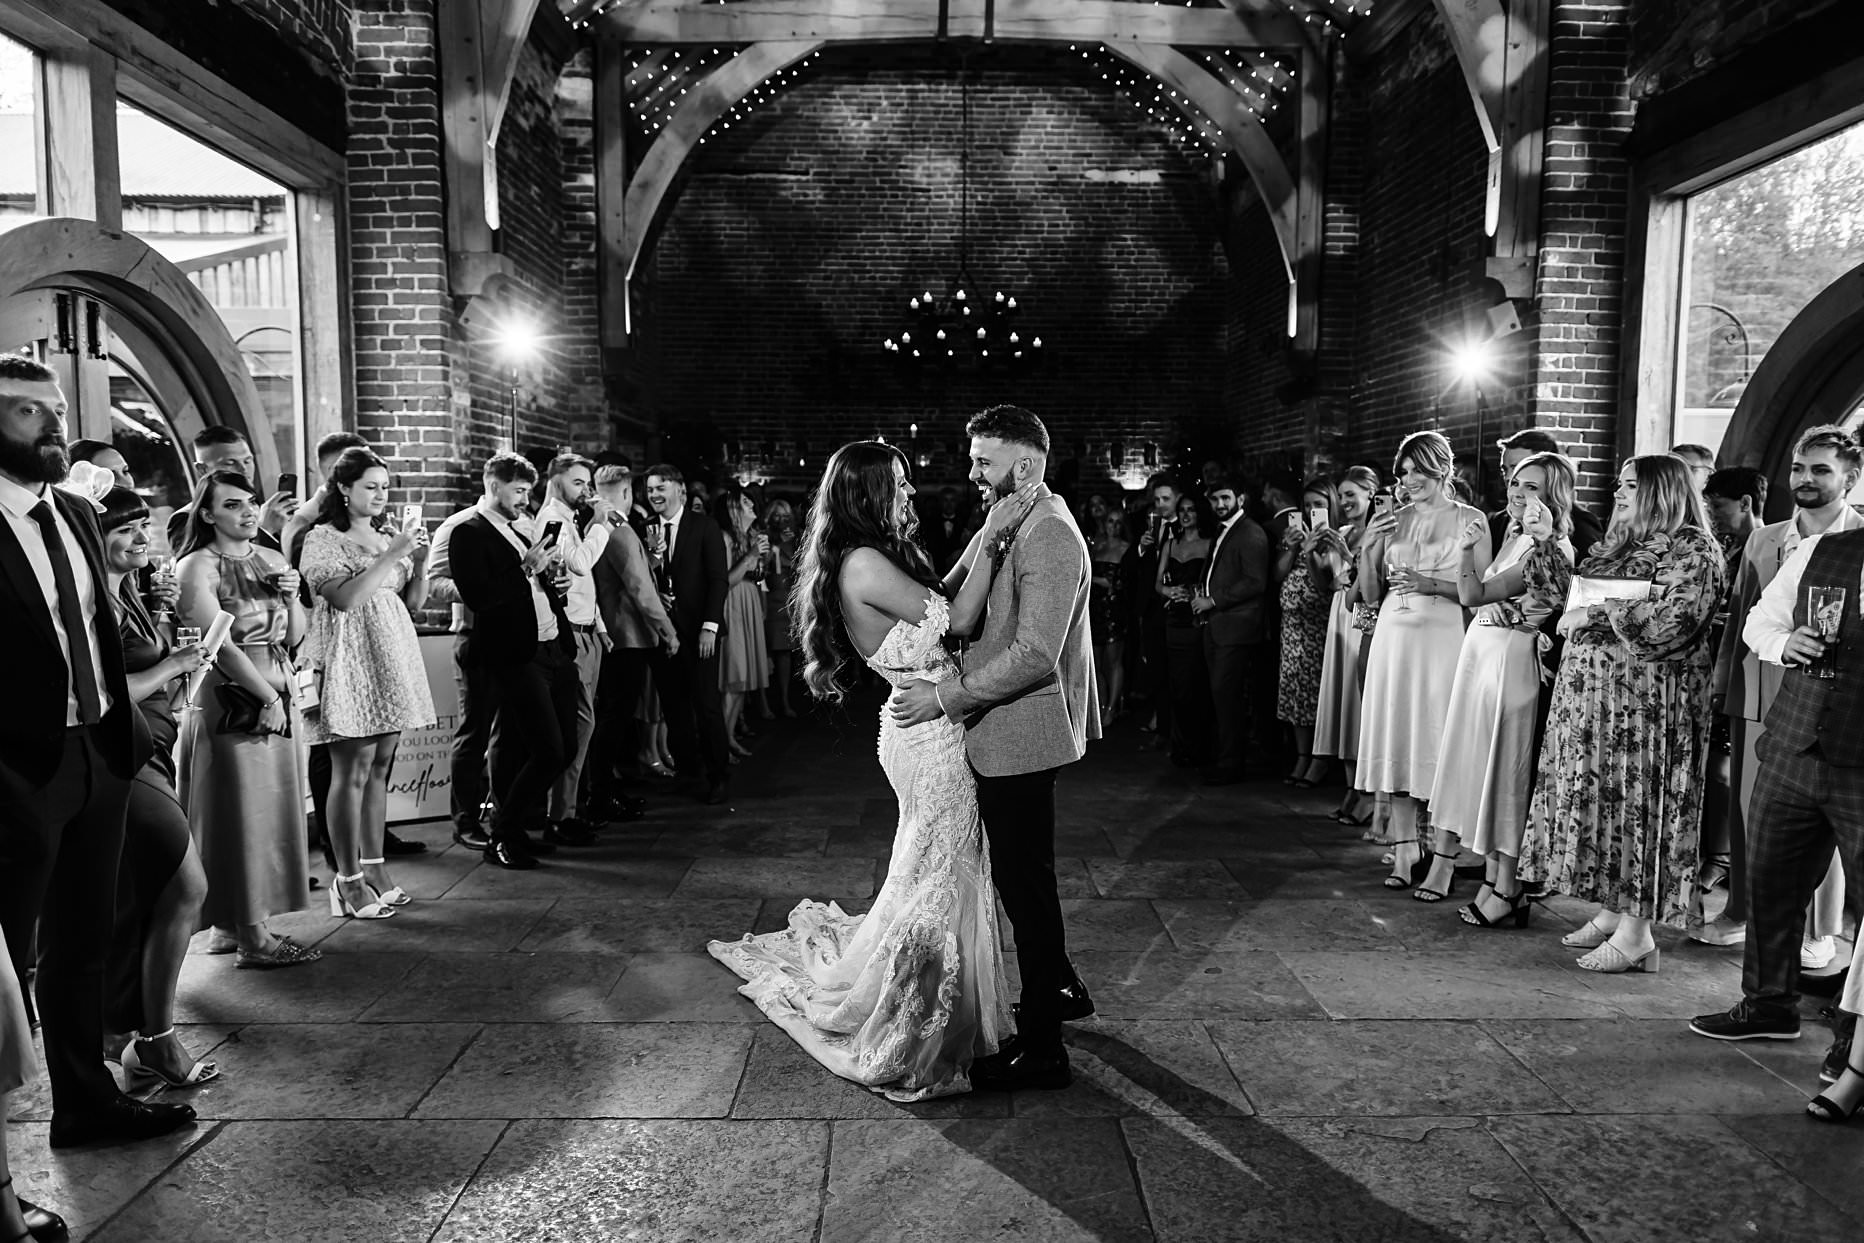 Bride and groom having their first dance at Hazel Gap Barn. Wedding guests surround them. They are dancing in the centre of the room and two bright lights shine in the background.